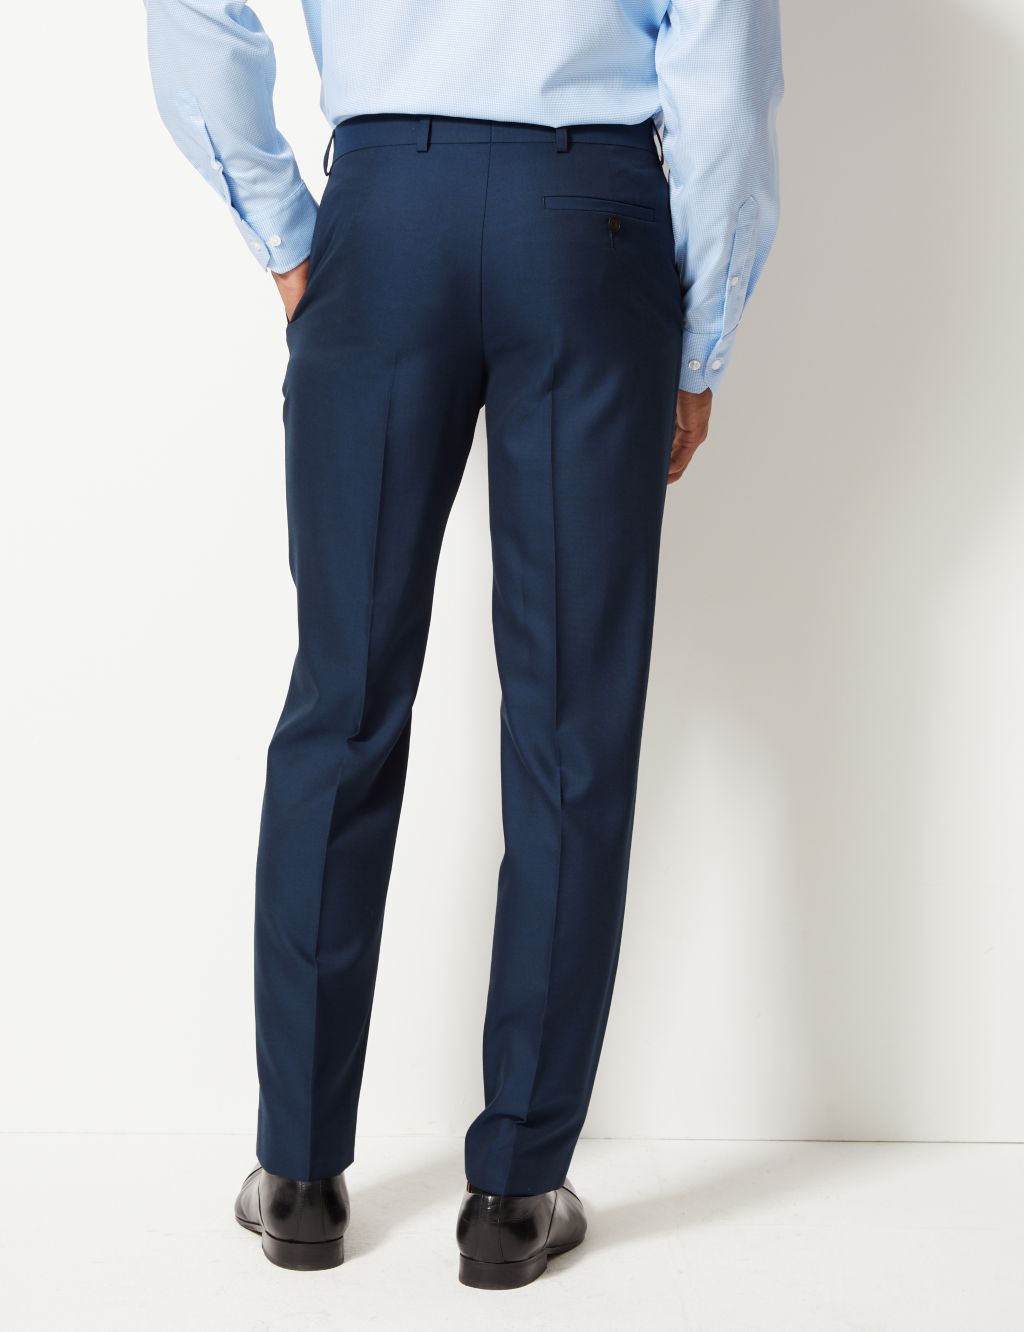 Indigo Tailored Fit Trousers | M&S Collection | M&S